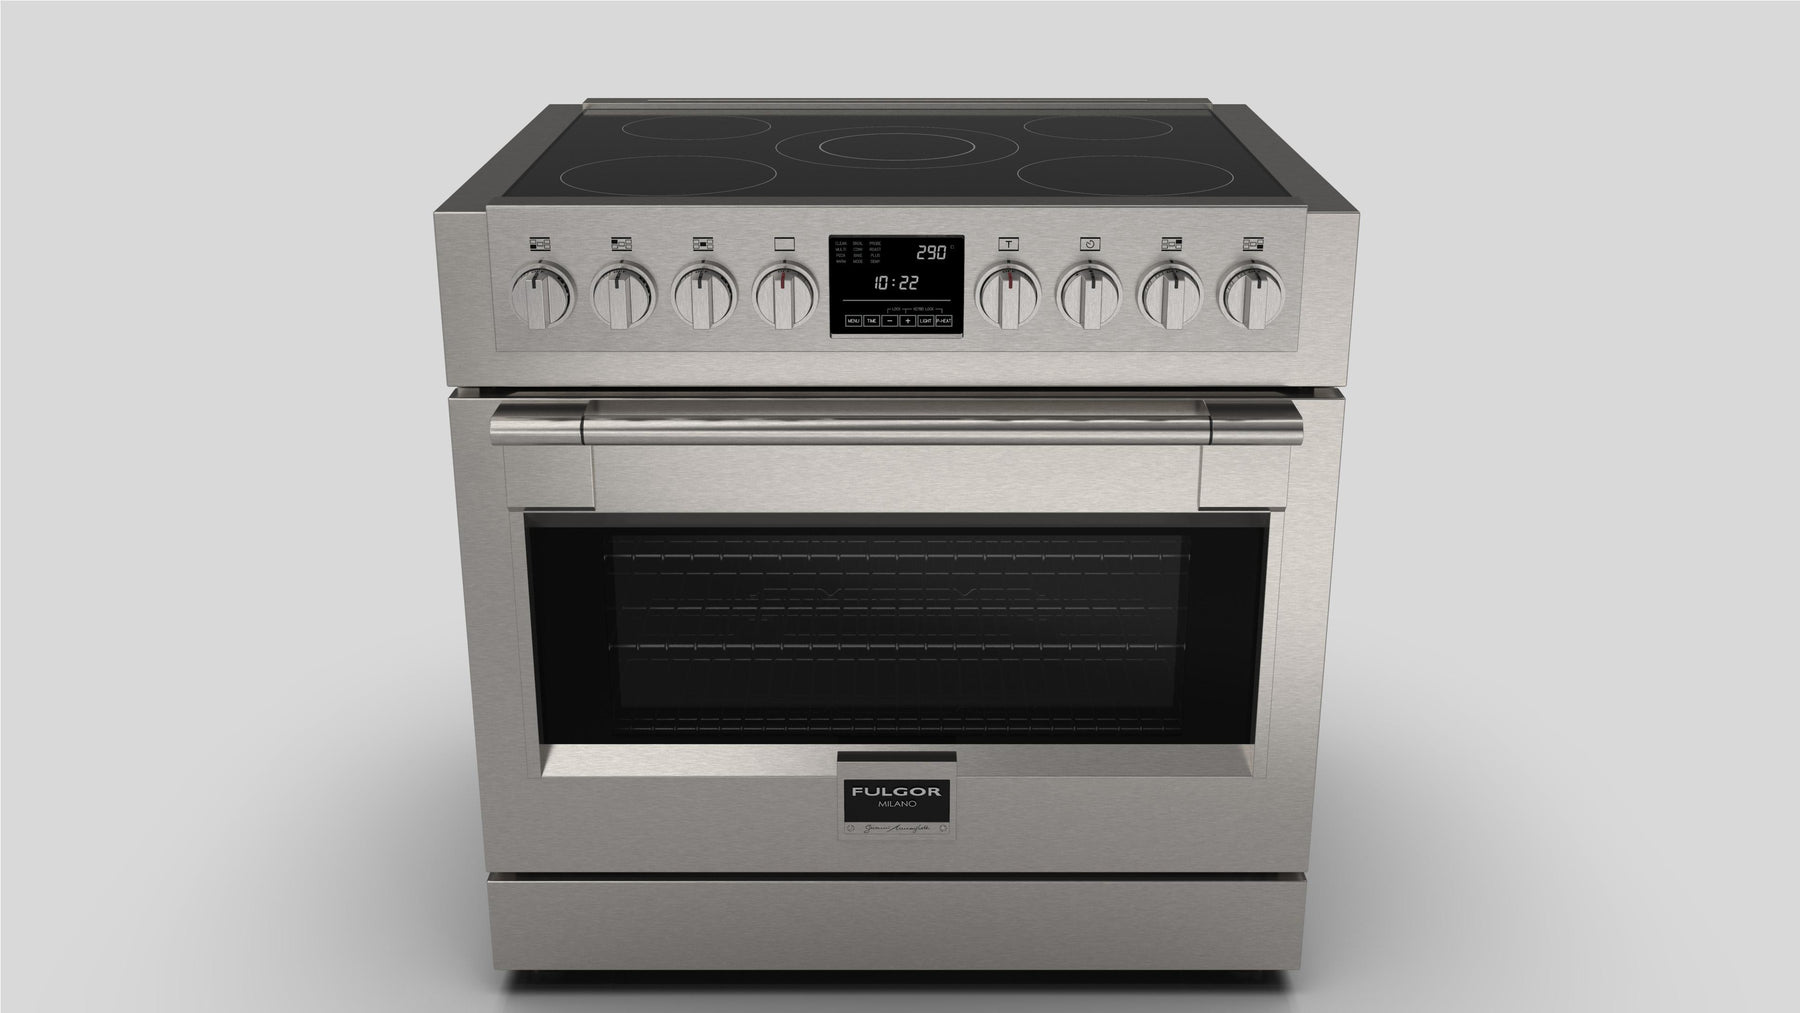 Cuisson modulaire 4 ZONES INDUCTION TOP 700 XP (371021)